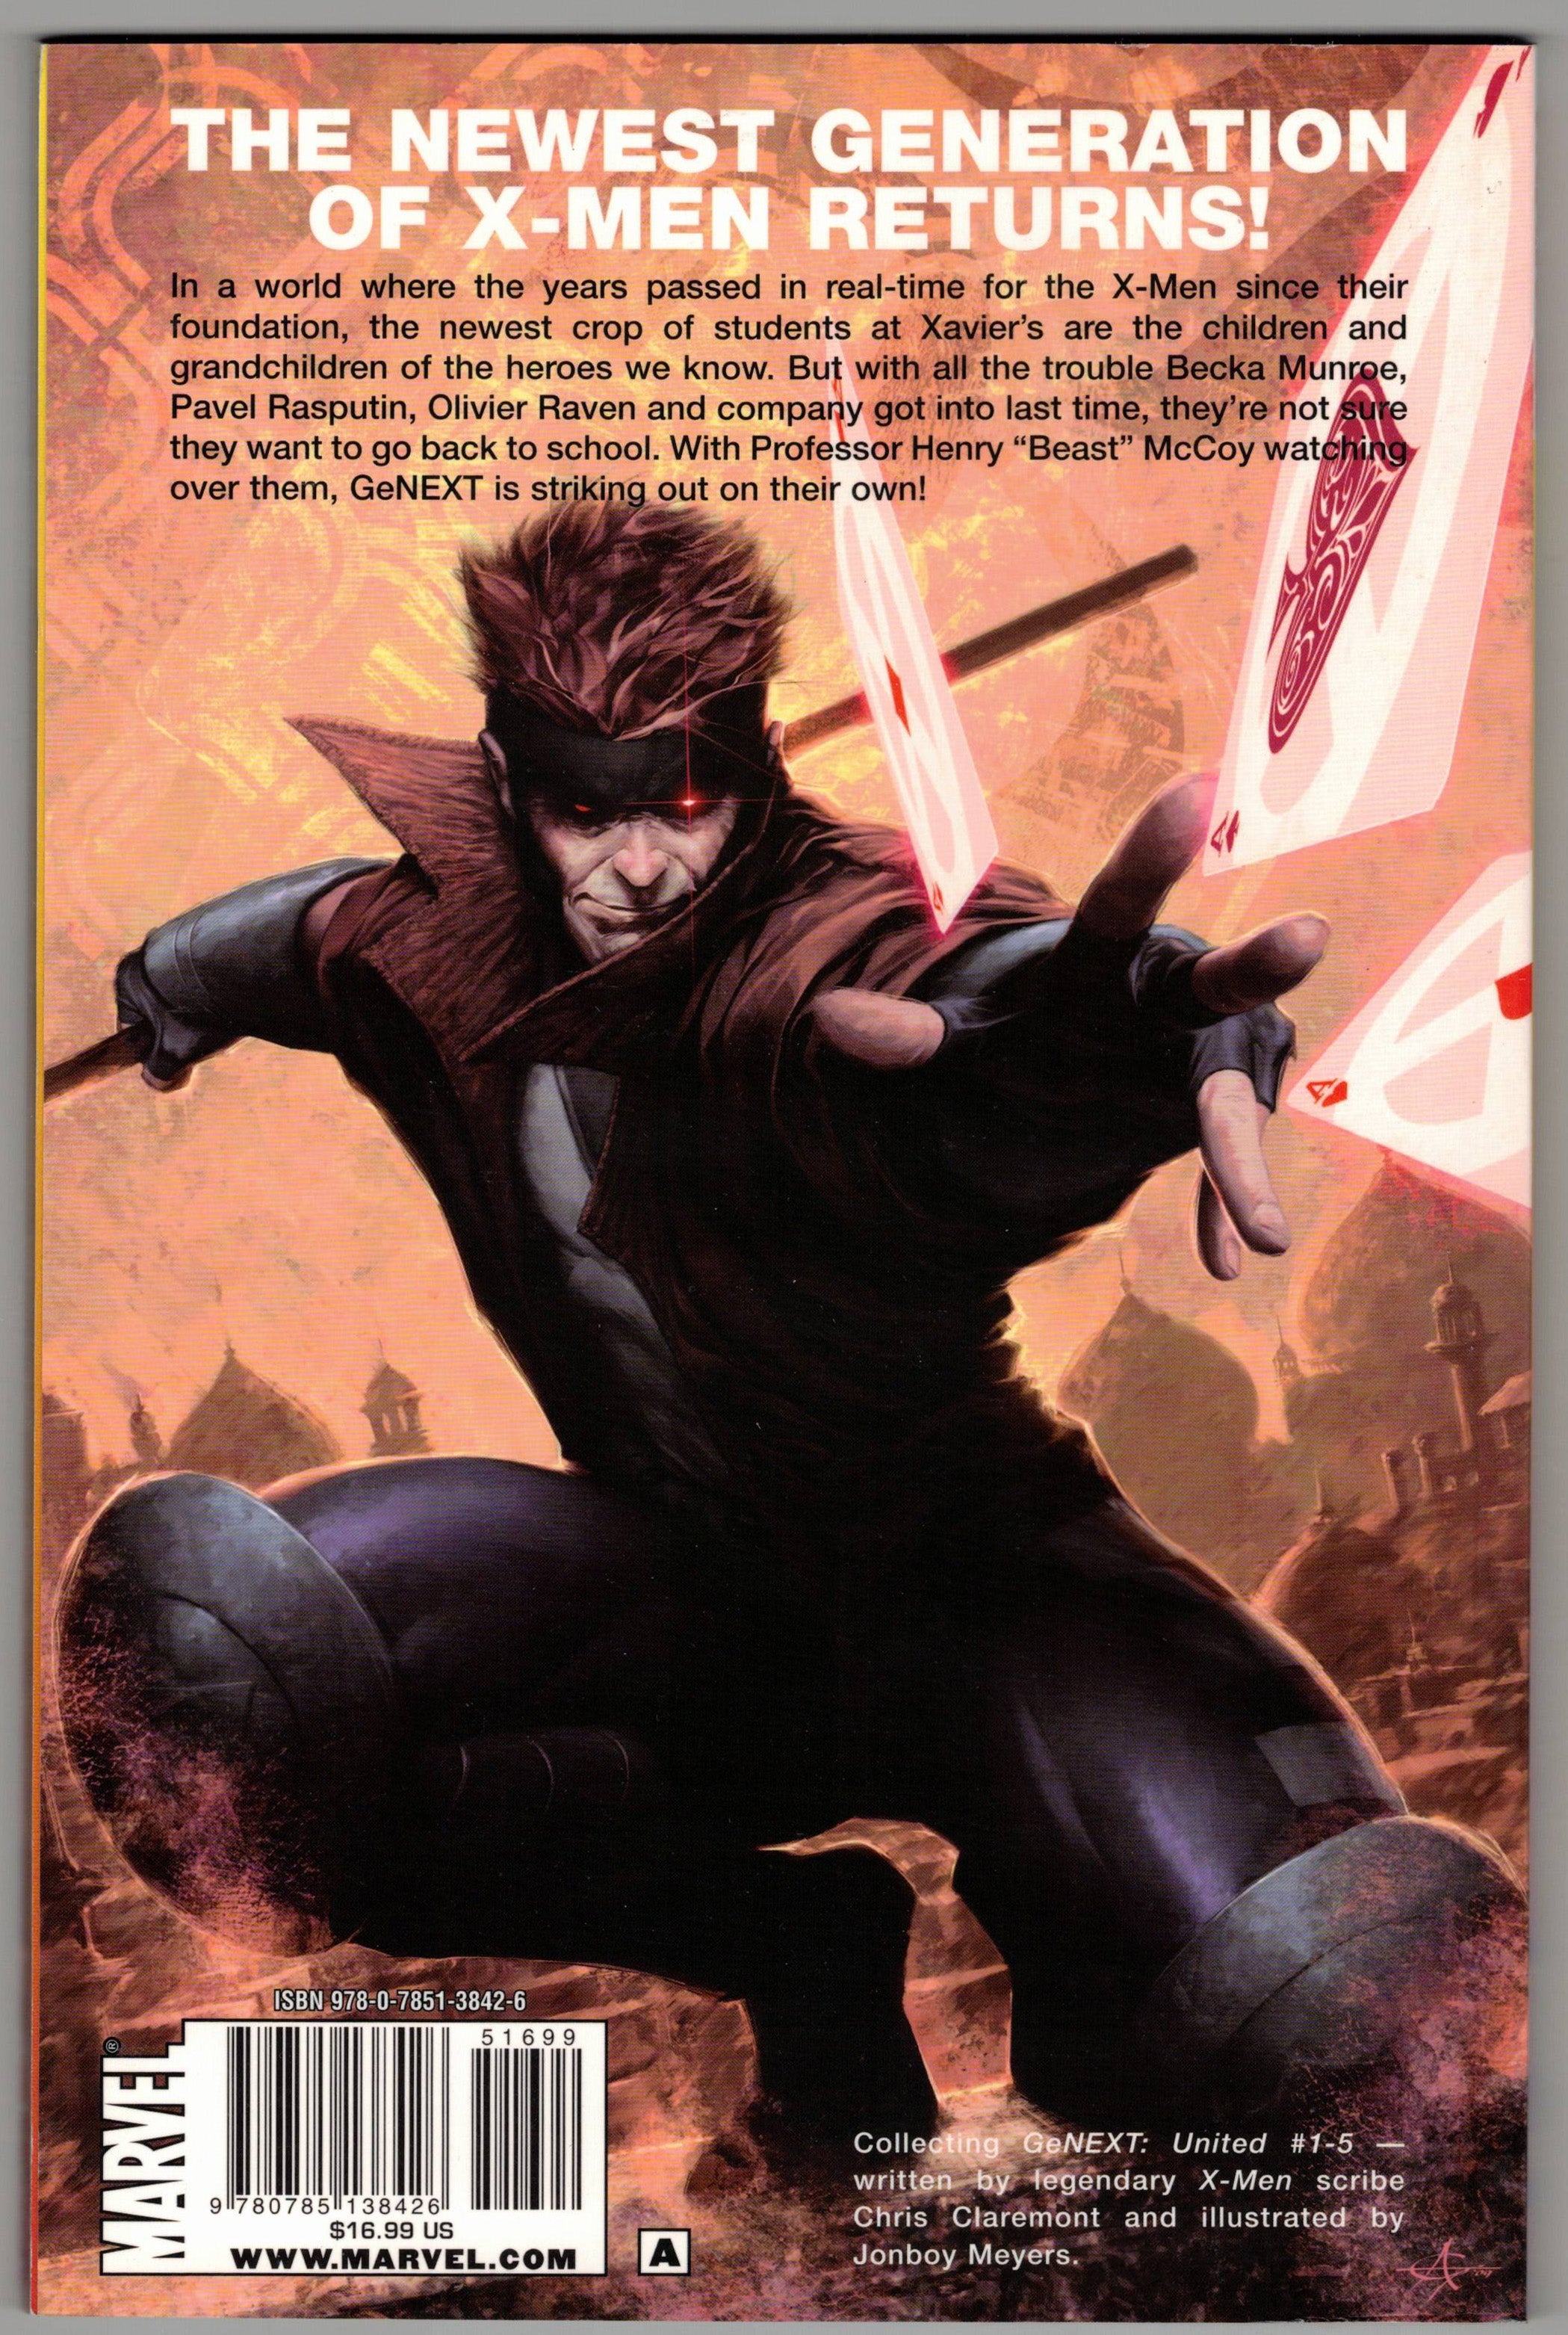 Photo of Genext United (2009) Trade Paperback Comic sold by Stronghold Collectibles